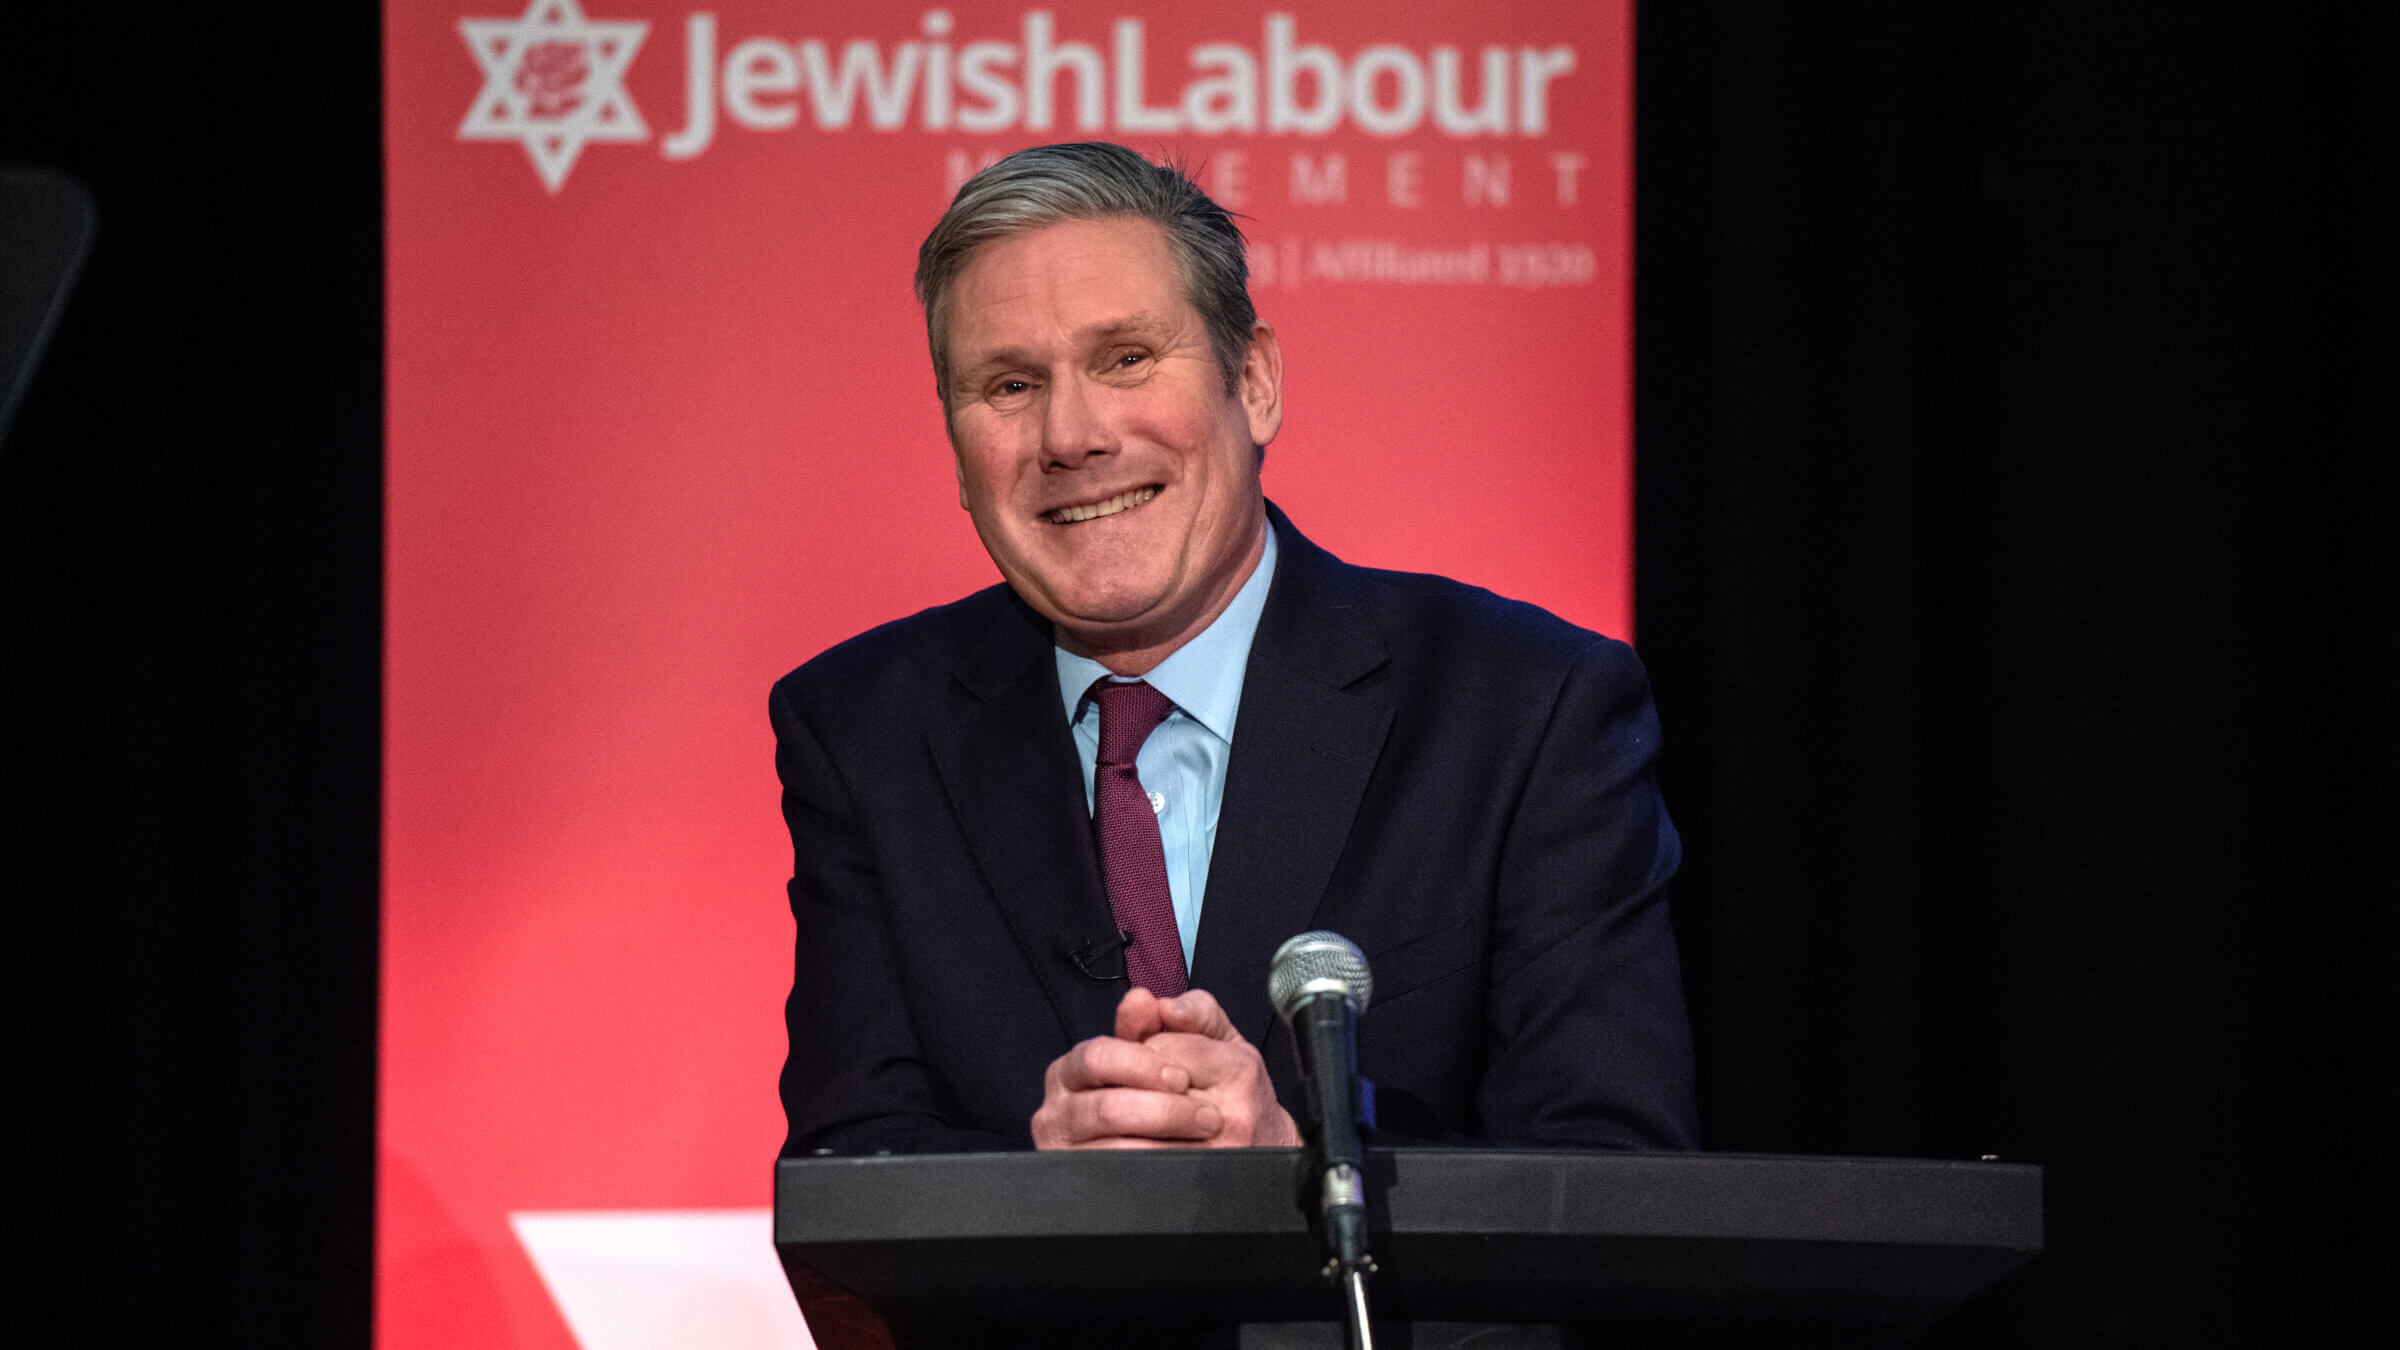 The United Kingdom's new prime minister, Keir Starmer, spoke in January to the Jewish Labour Movement at a conference in London.